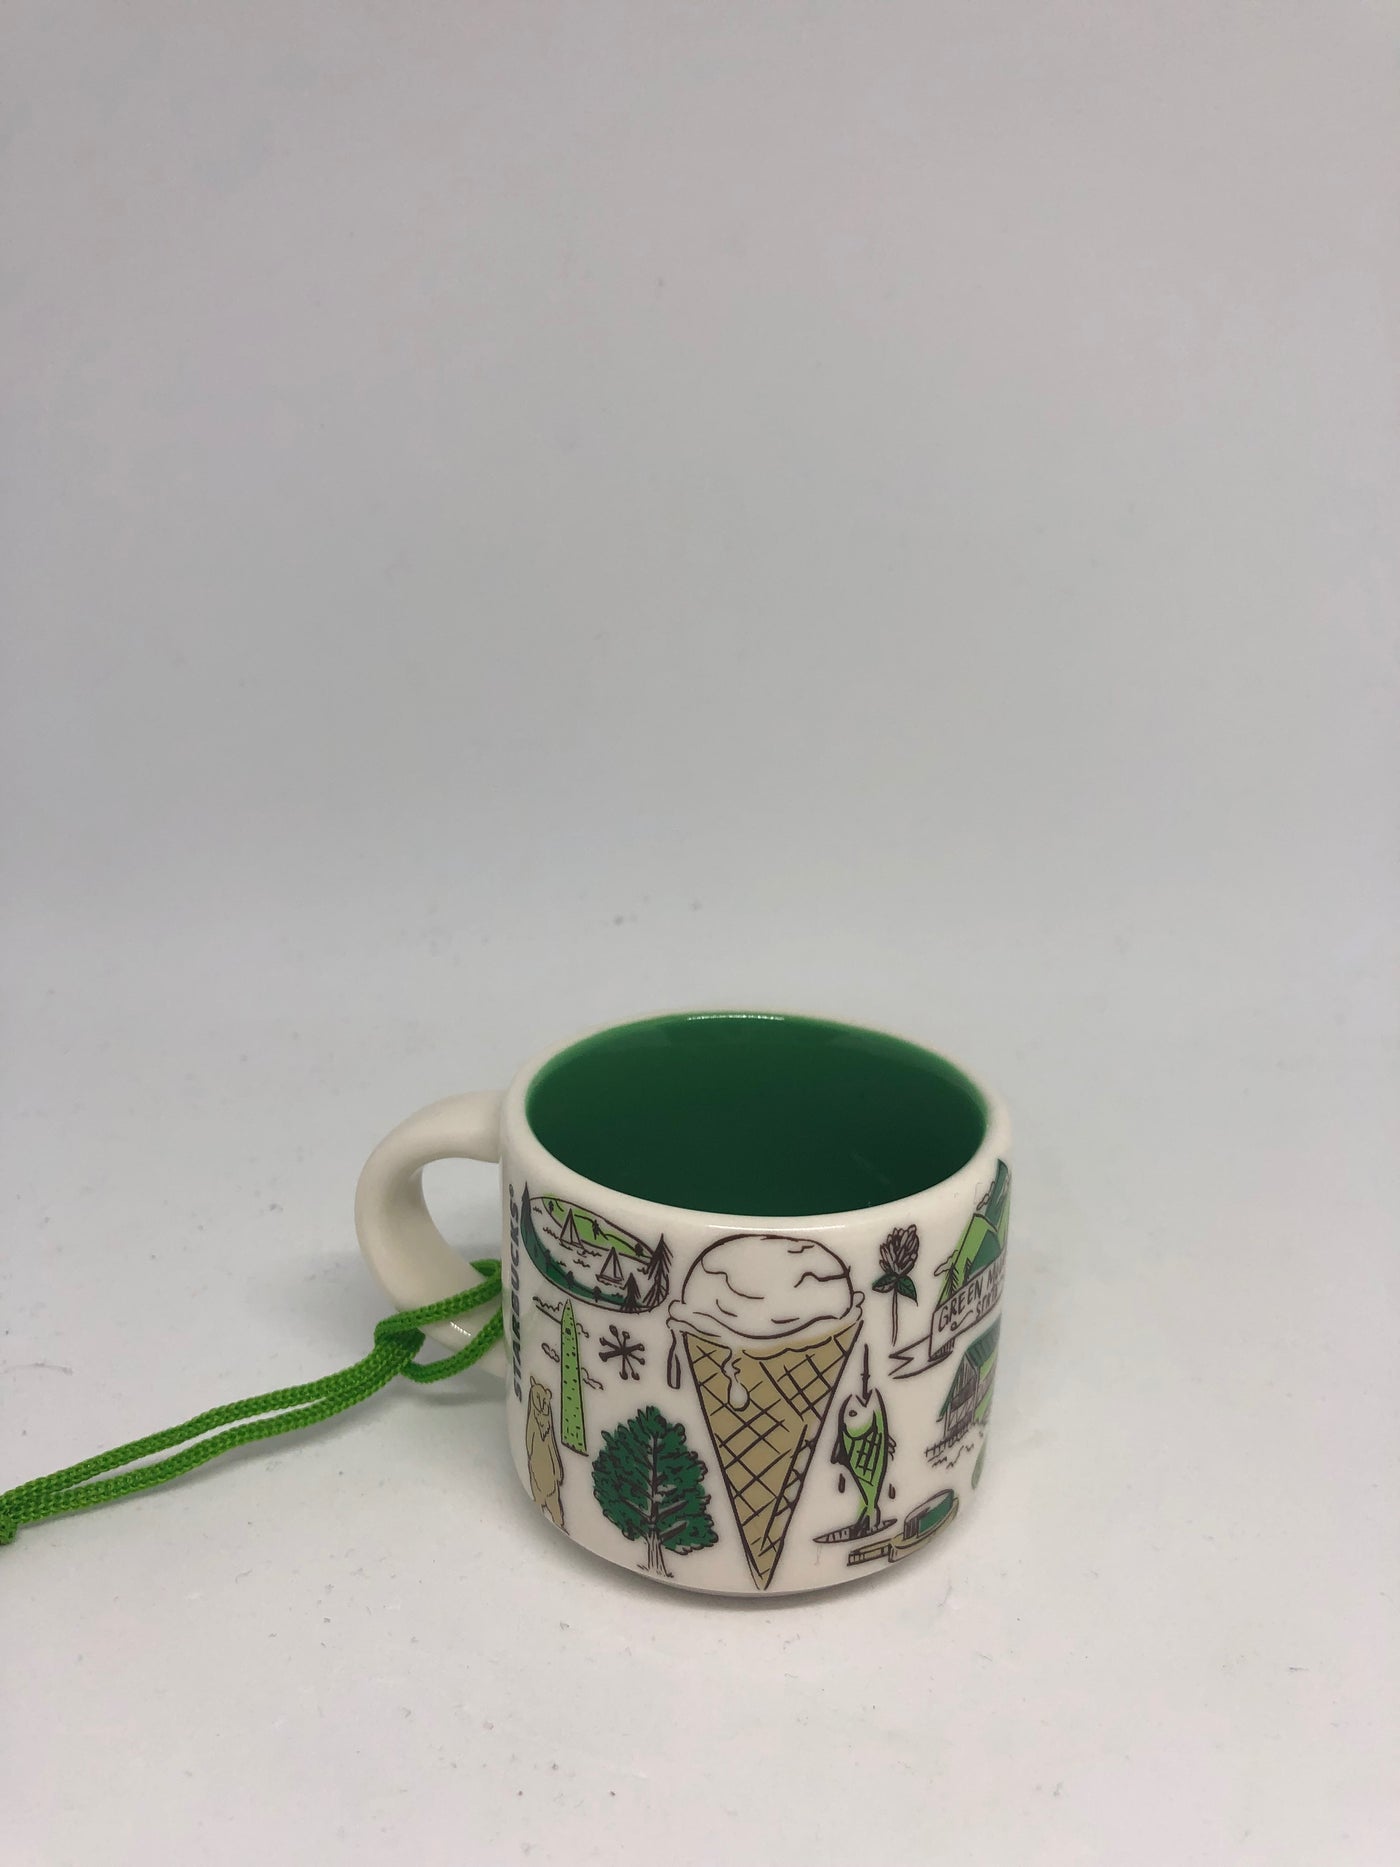 Starbucks Coffee Been There Vermont Ceramic Mug Ornament New with Box